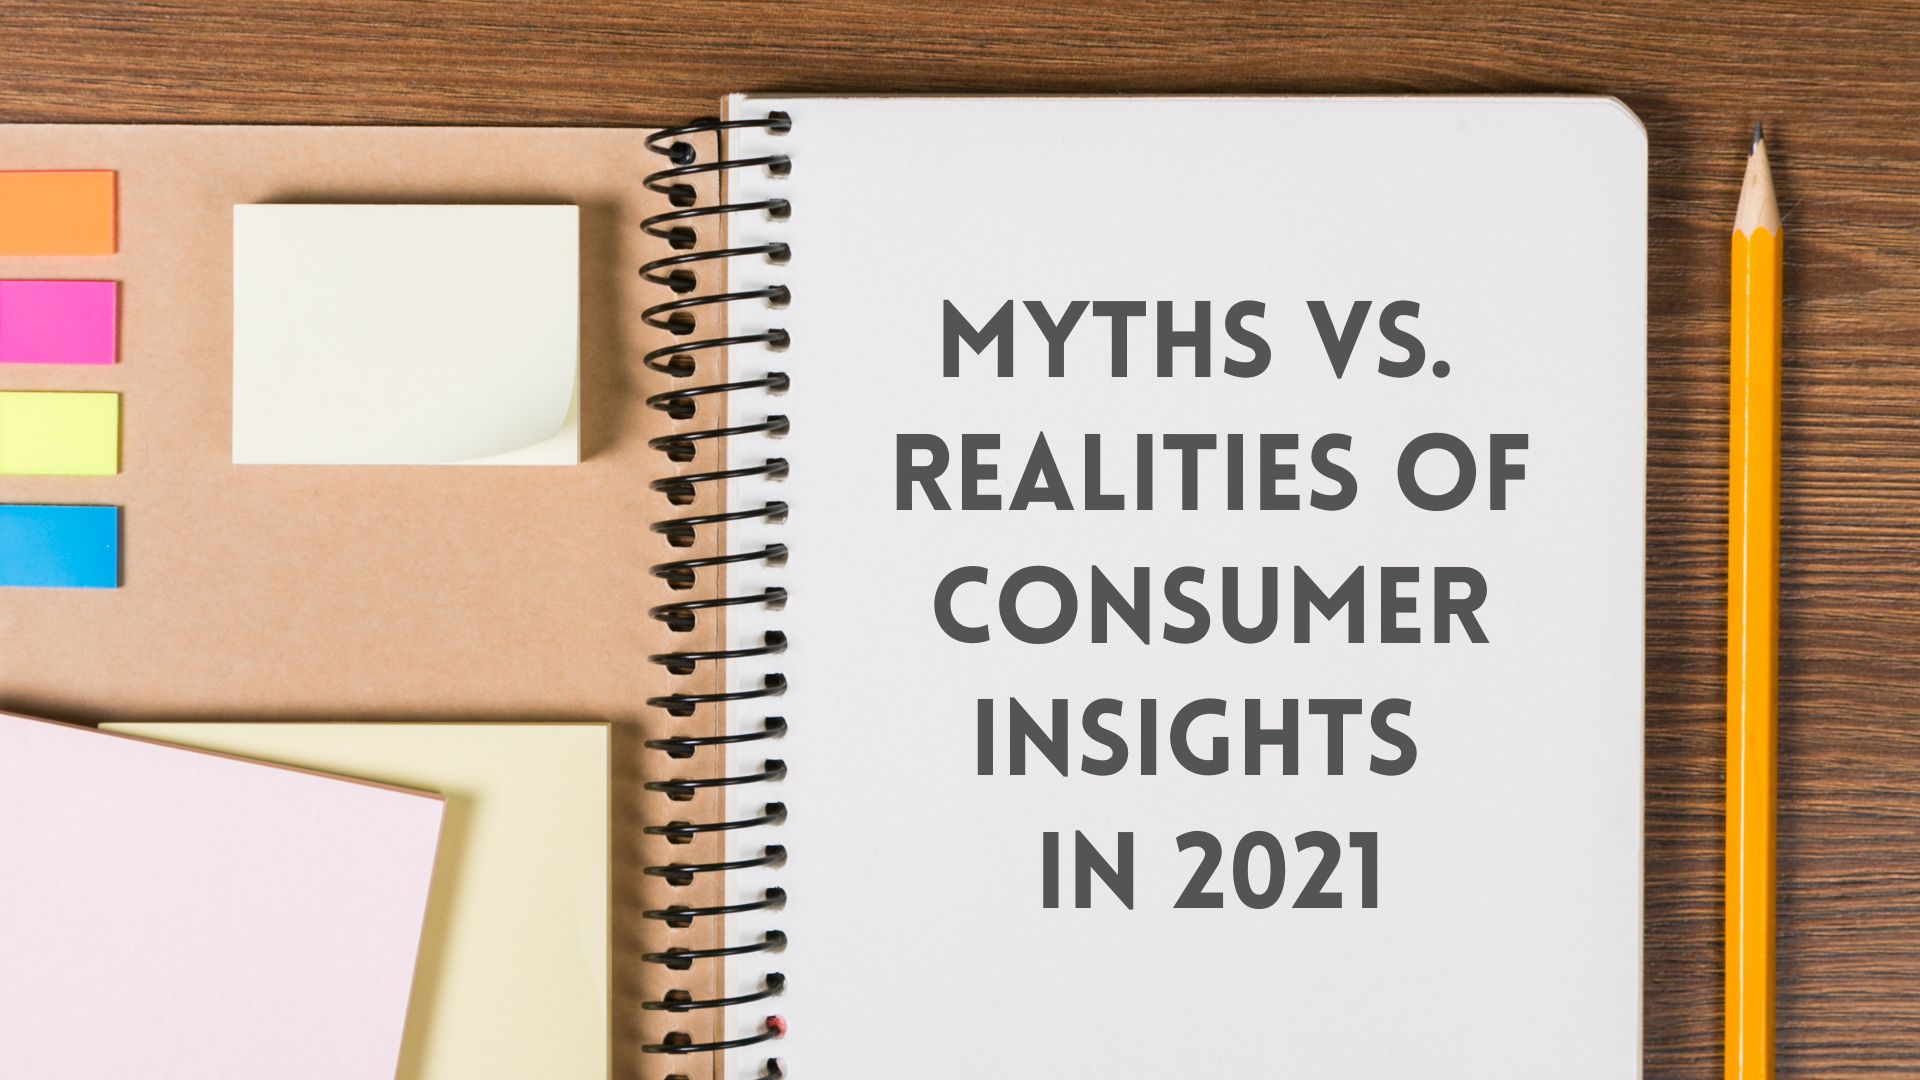 Myths and Realities of Consumer Insights in 2021